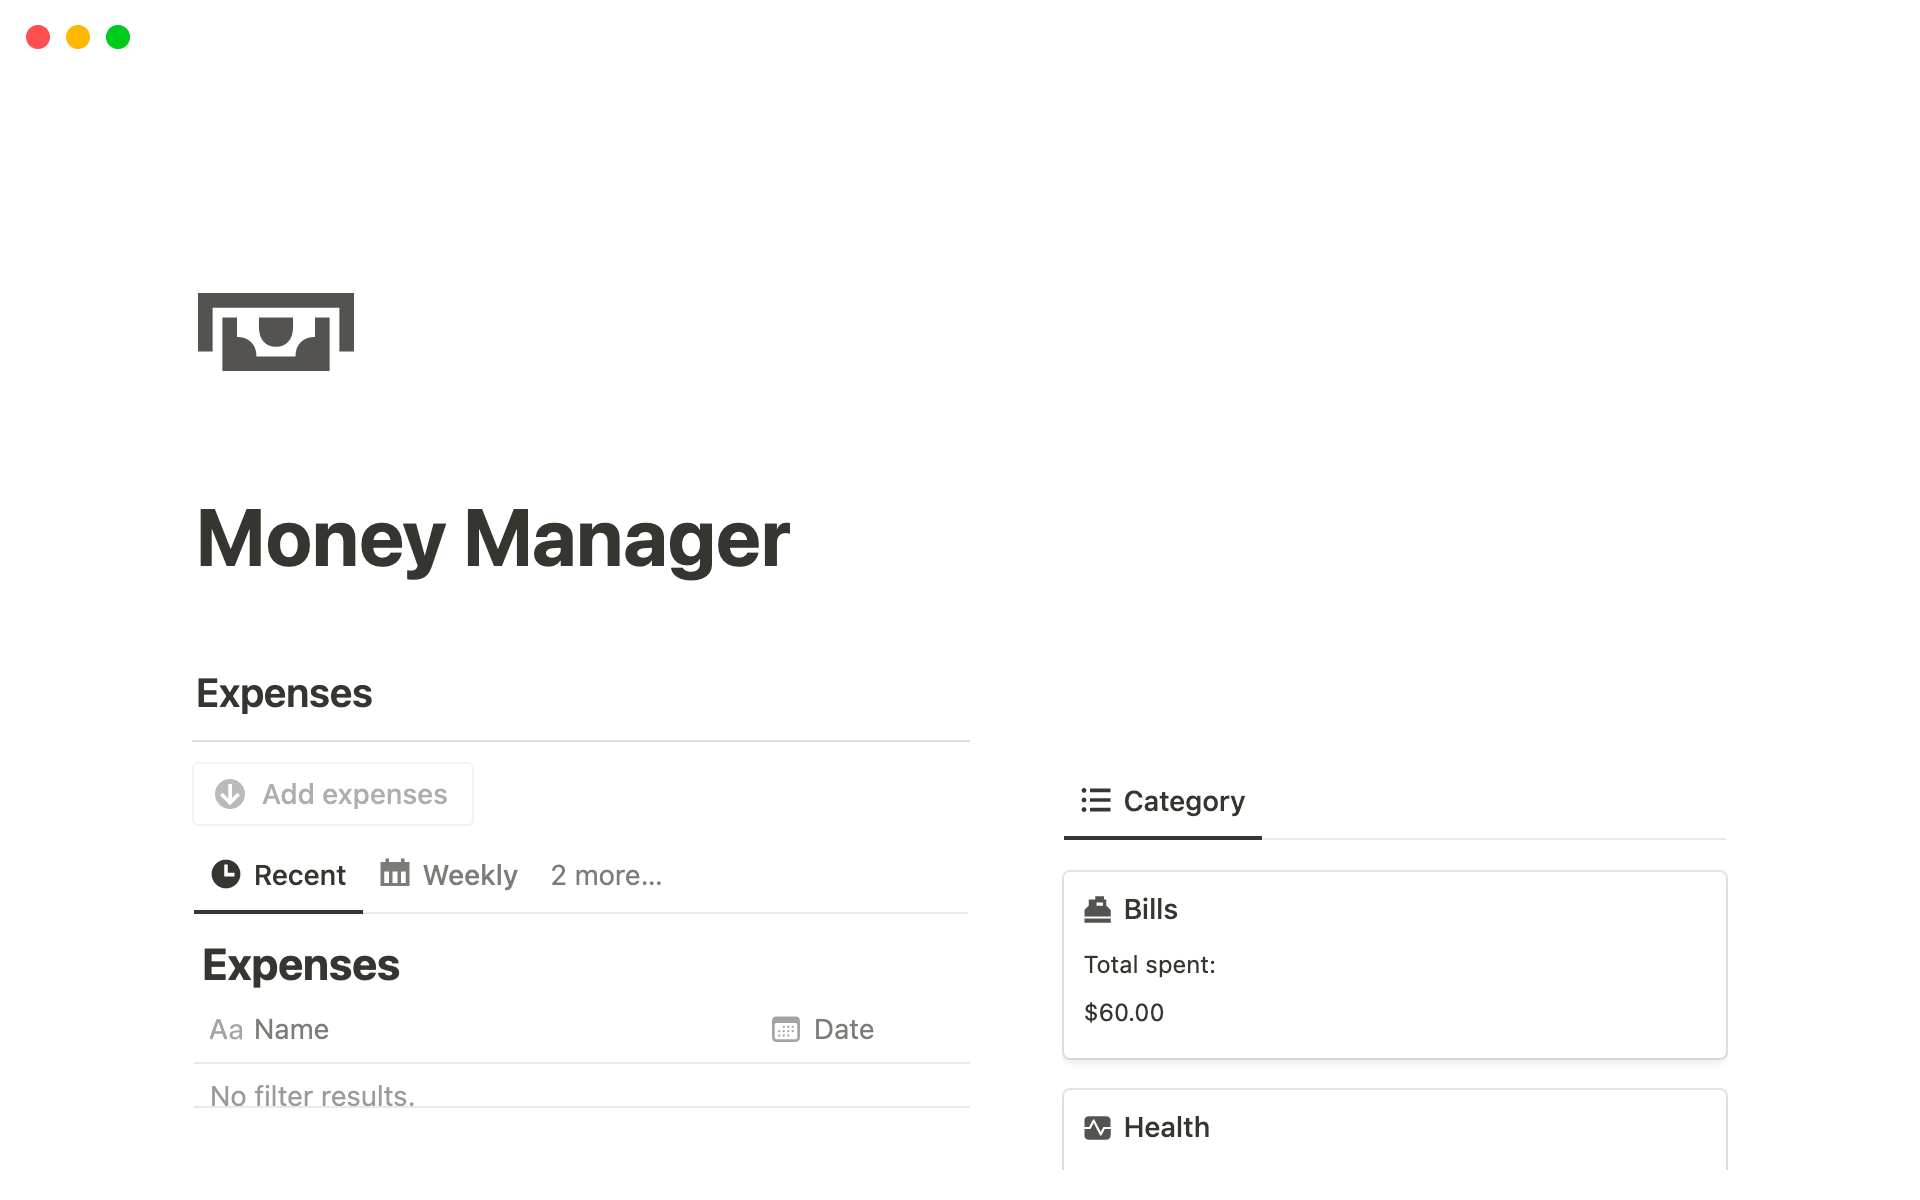 The Money Manager template is designed to help you track your expenses and gain better control of your finances.